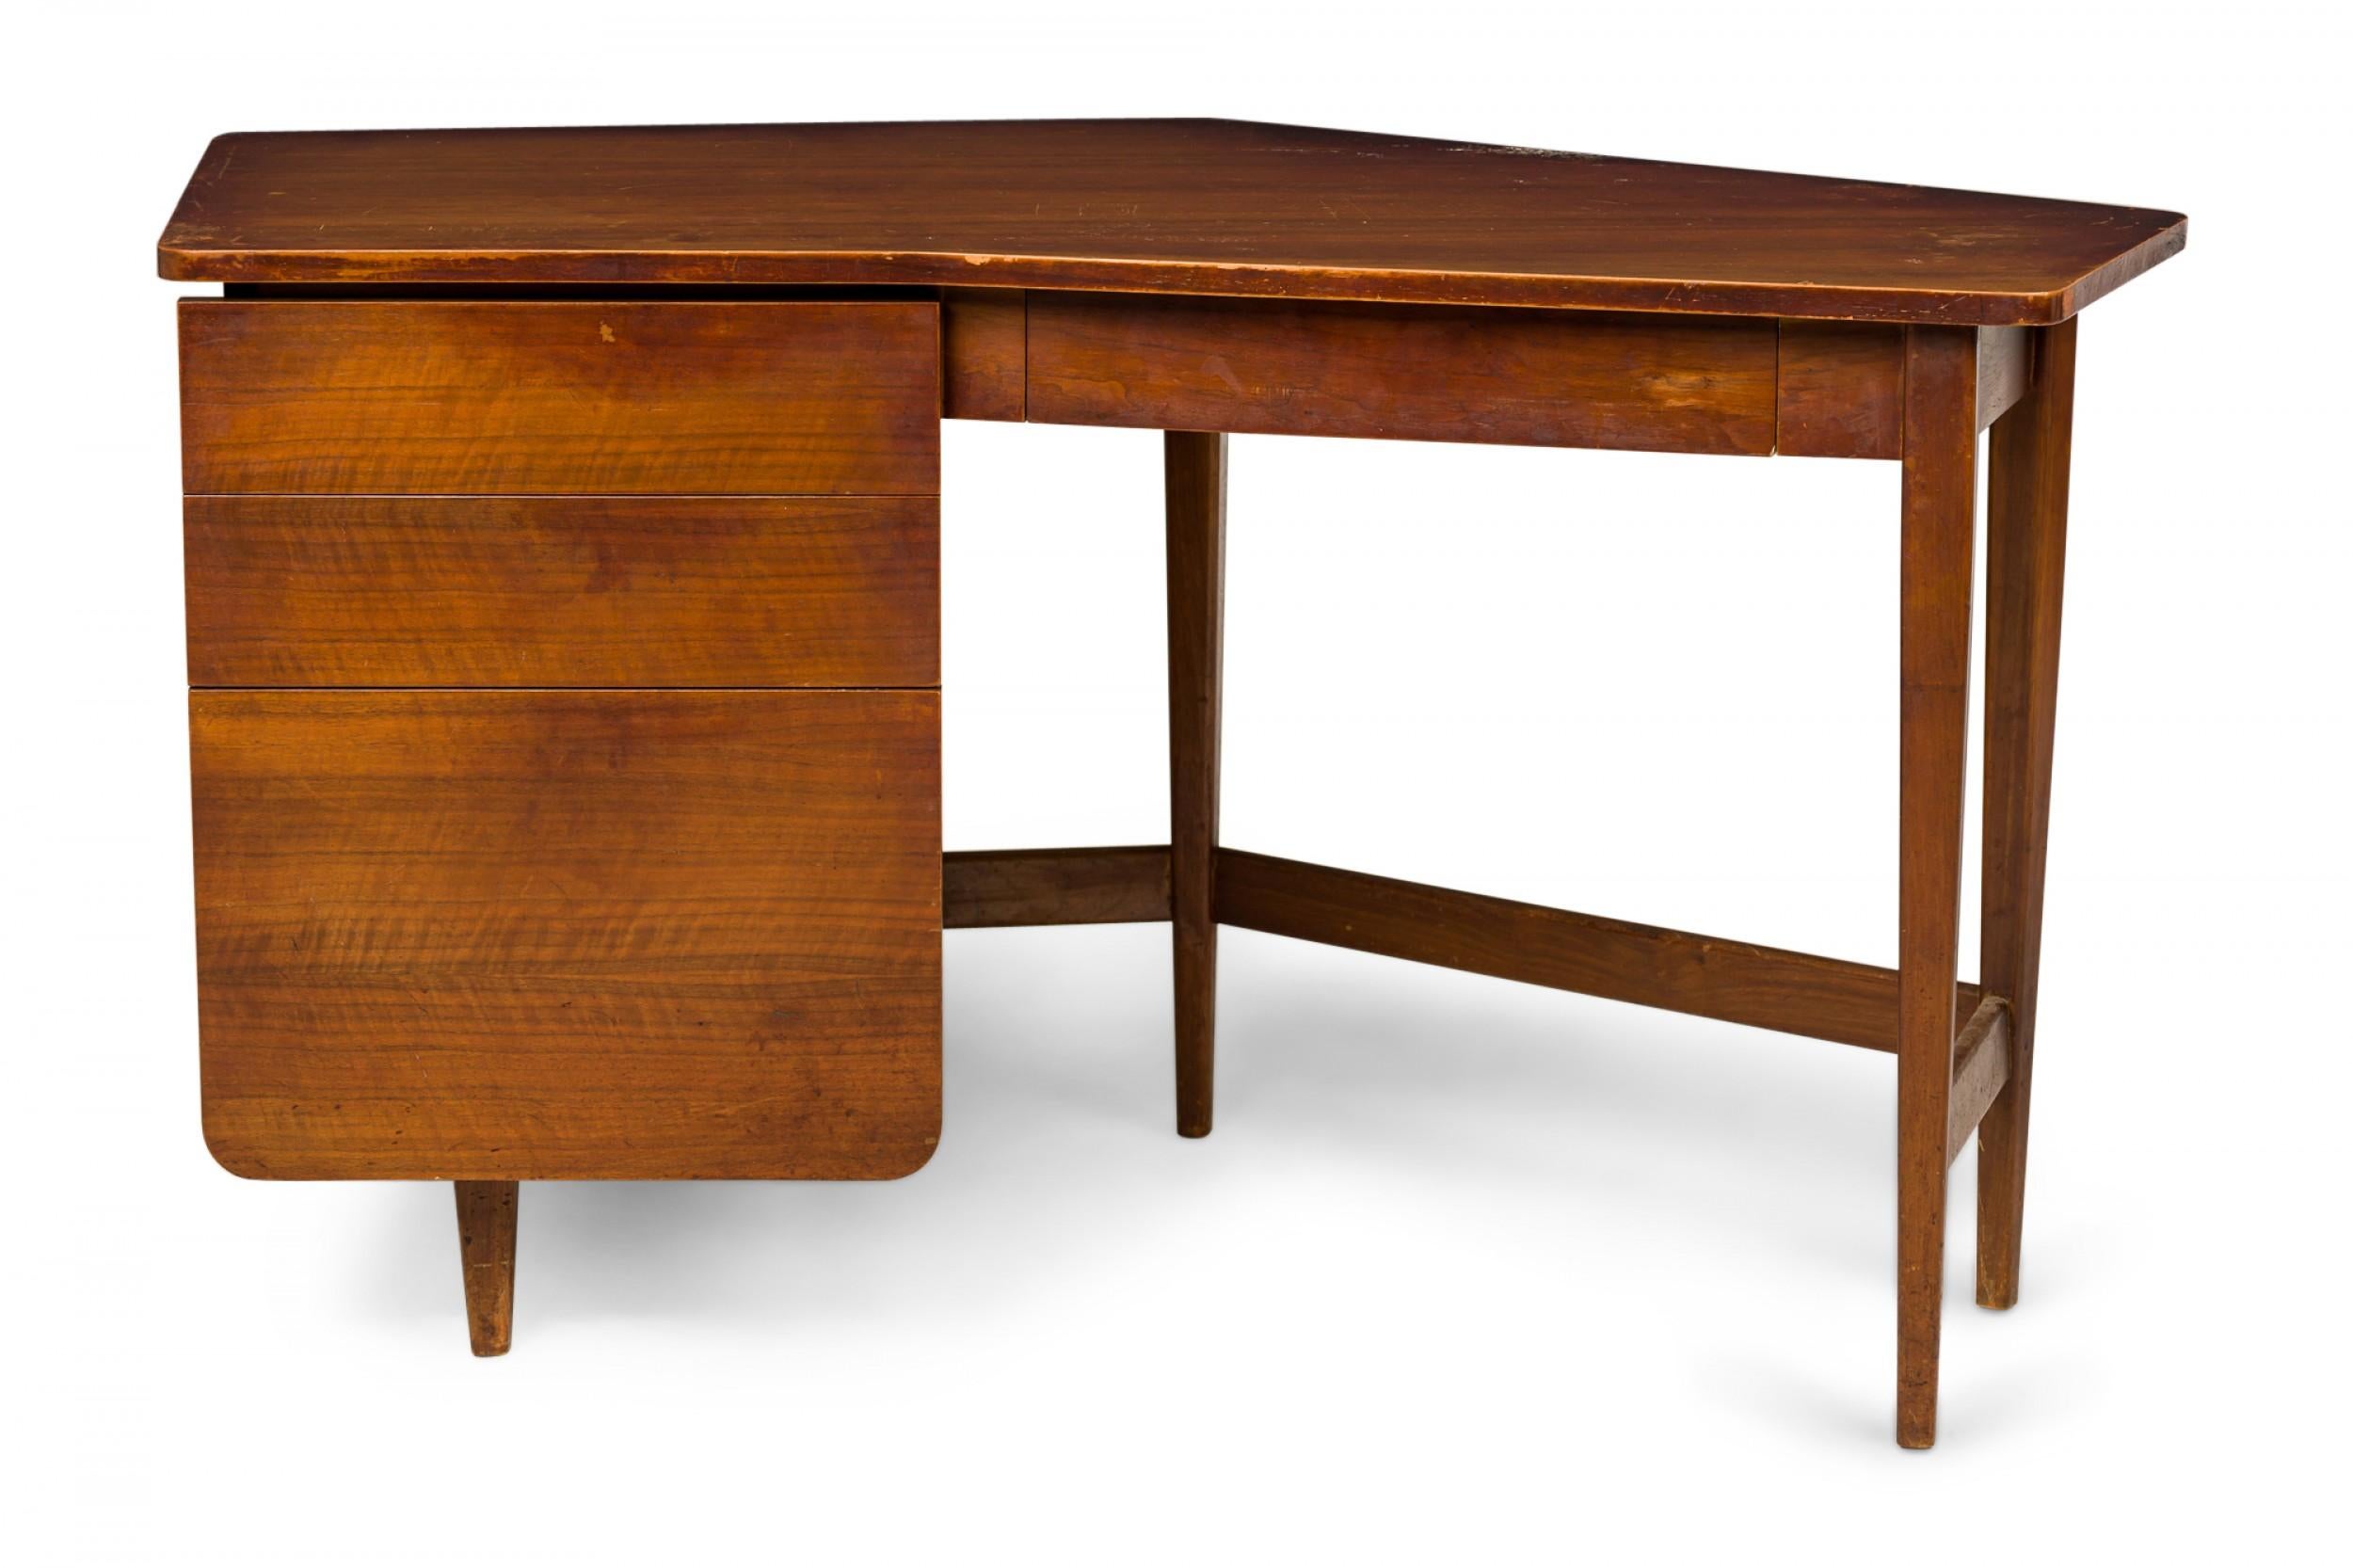 American Mid-Century walnut writing desk with an angular top and two left-hand drawers, supported by five tapered dowel legs connected by stretchers. (BERTHA SCHAEFER FOR SINGER & SONS)